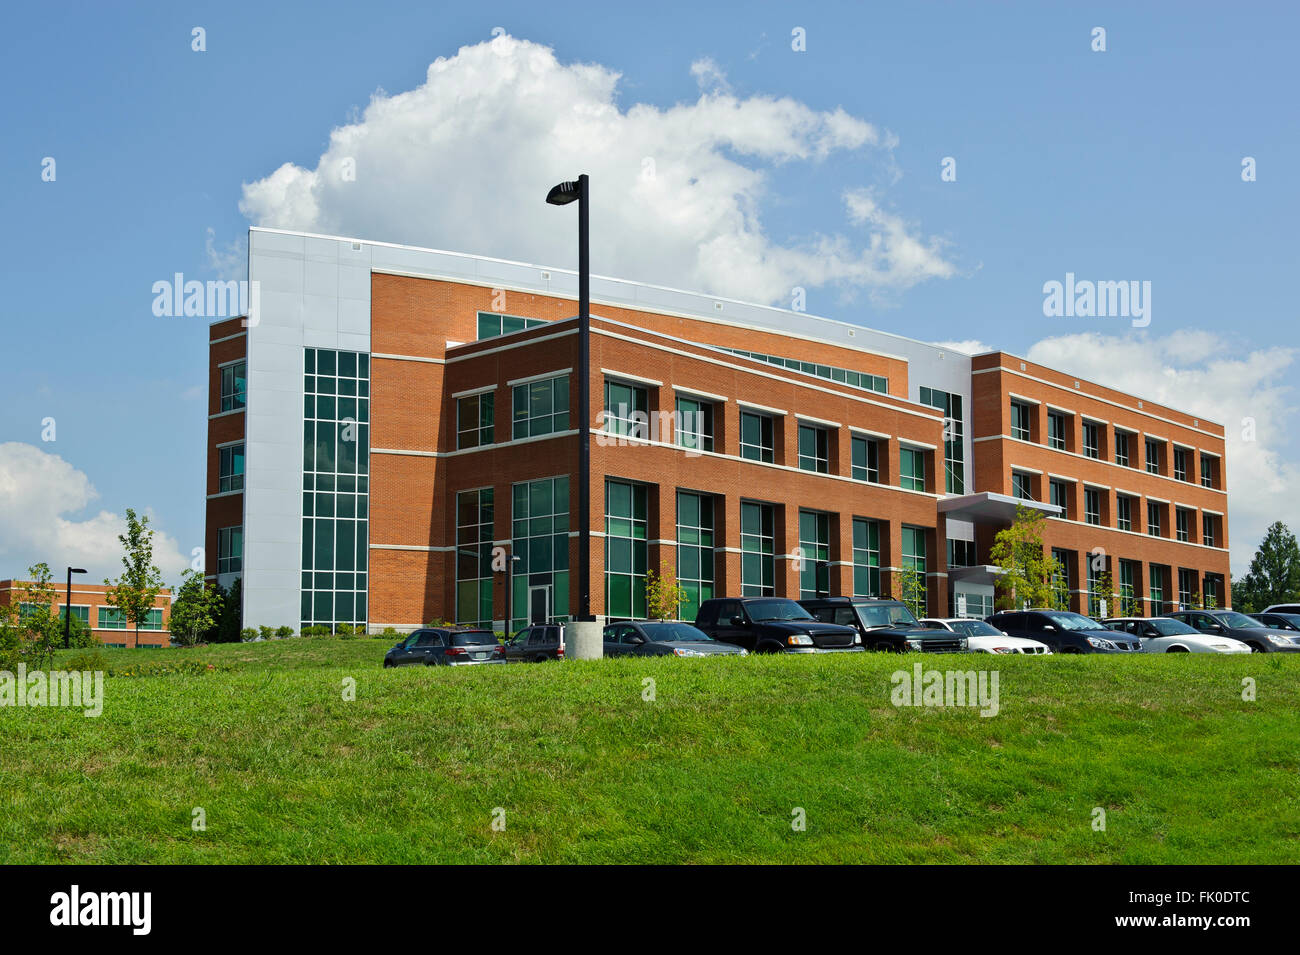 Generic Office Building, School, Hospital, Government Building Stock Photo